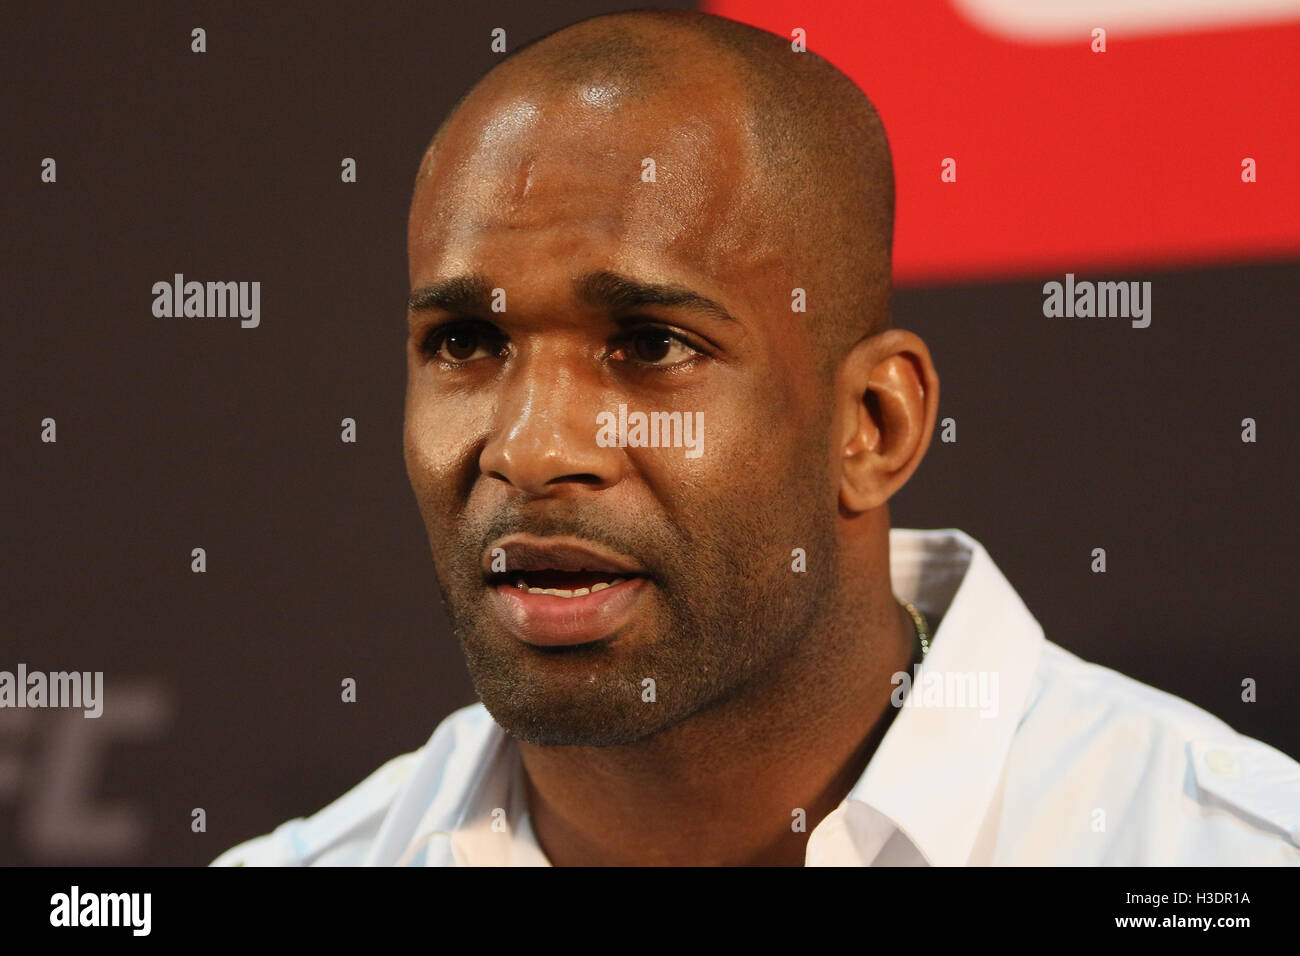 Manchester, UK. 6th October, 2016. UFC 204 - Media Day at Arena Manchester. Thursday the 6 of Oct. 2016.Jimi Manuwa answers media questions ahead of UFC 204.   Credit:  Dan Cooke/Alamy Live News Stock Photo